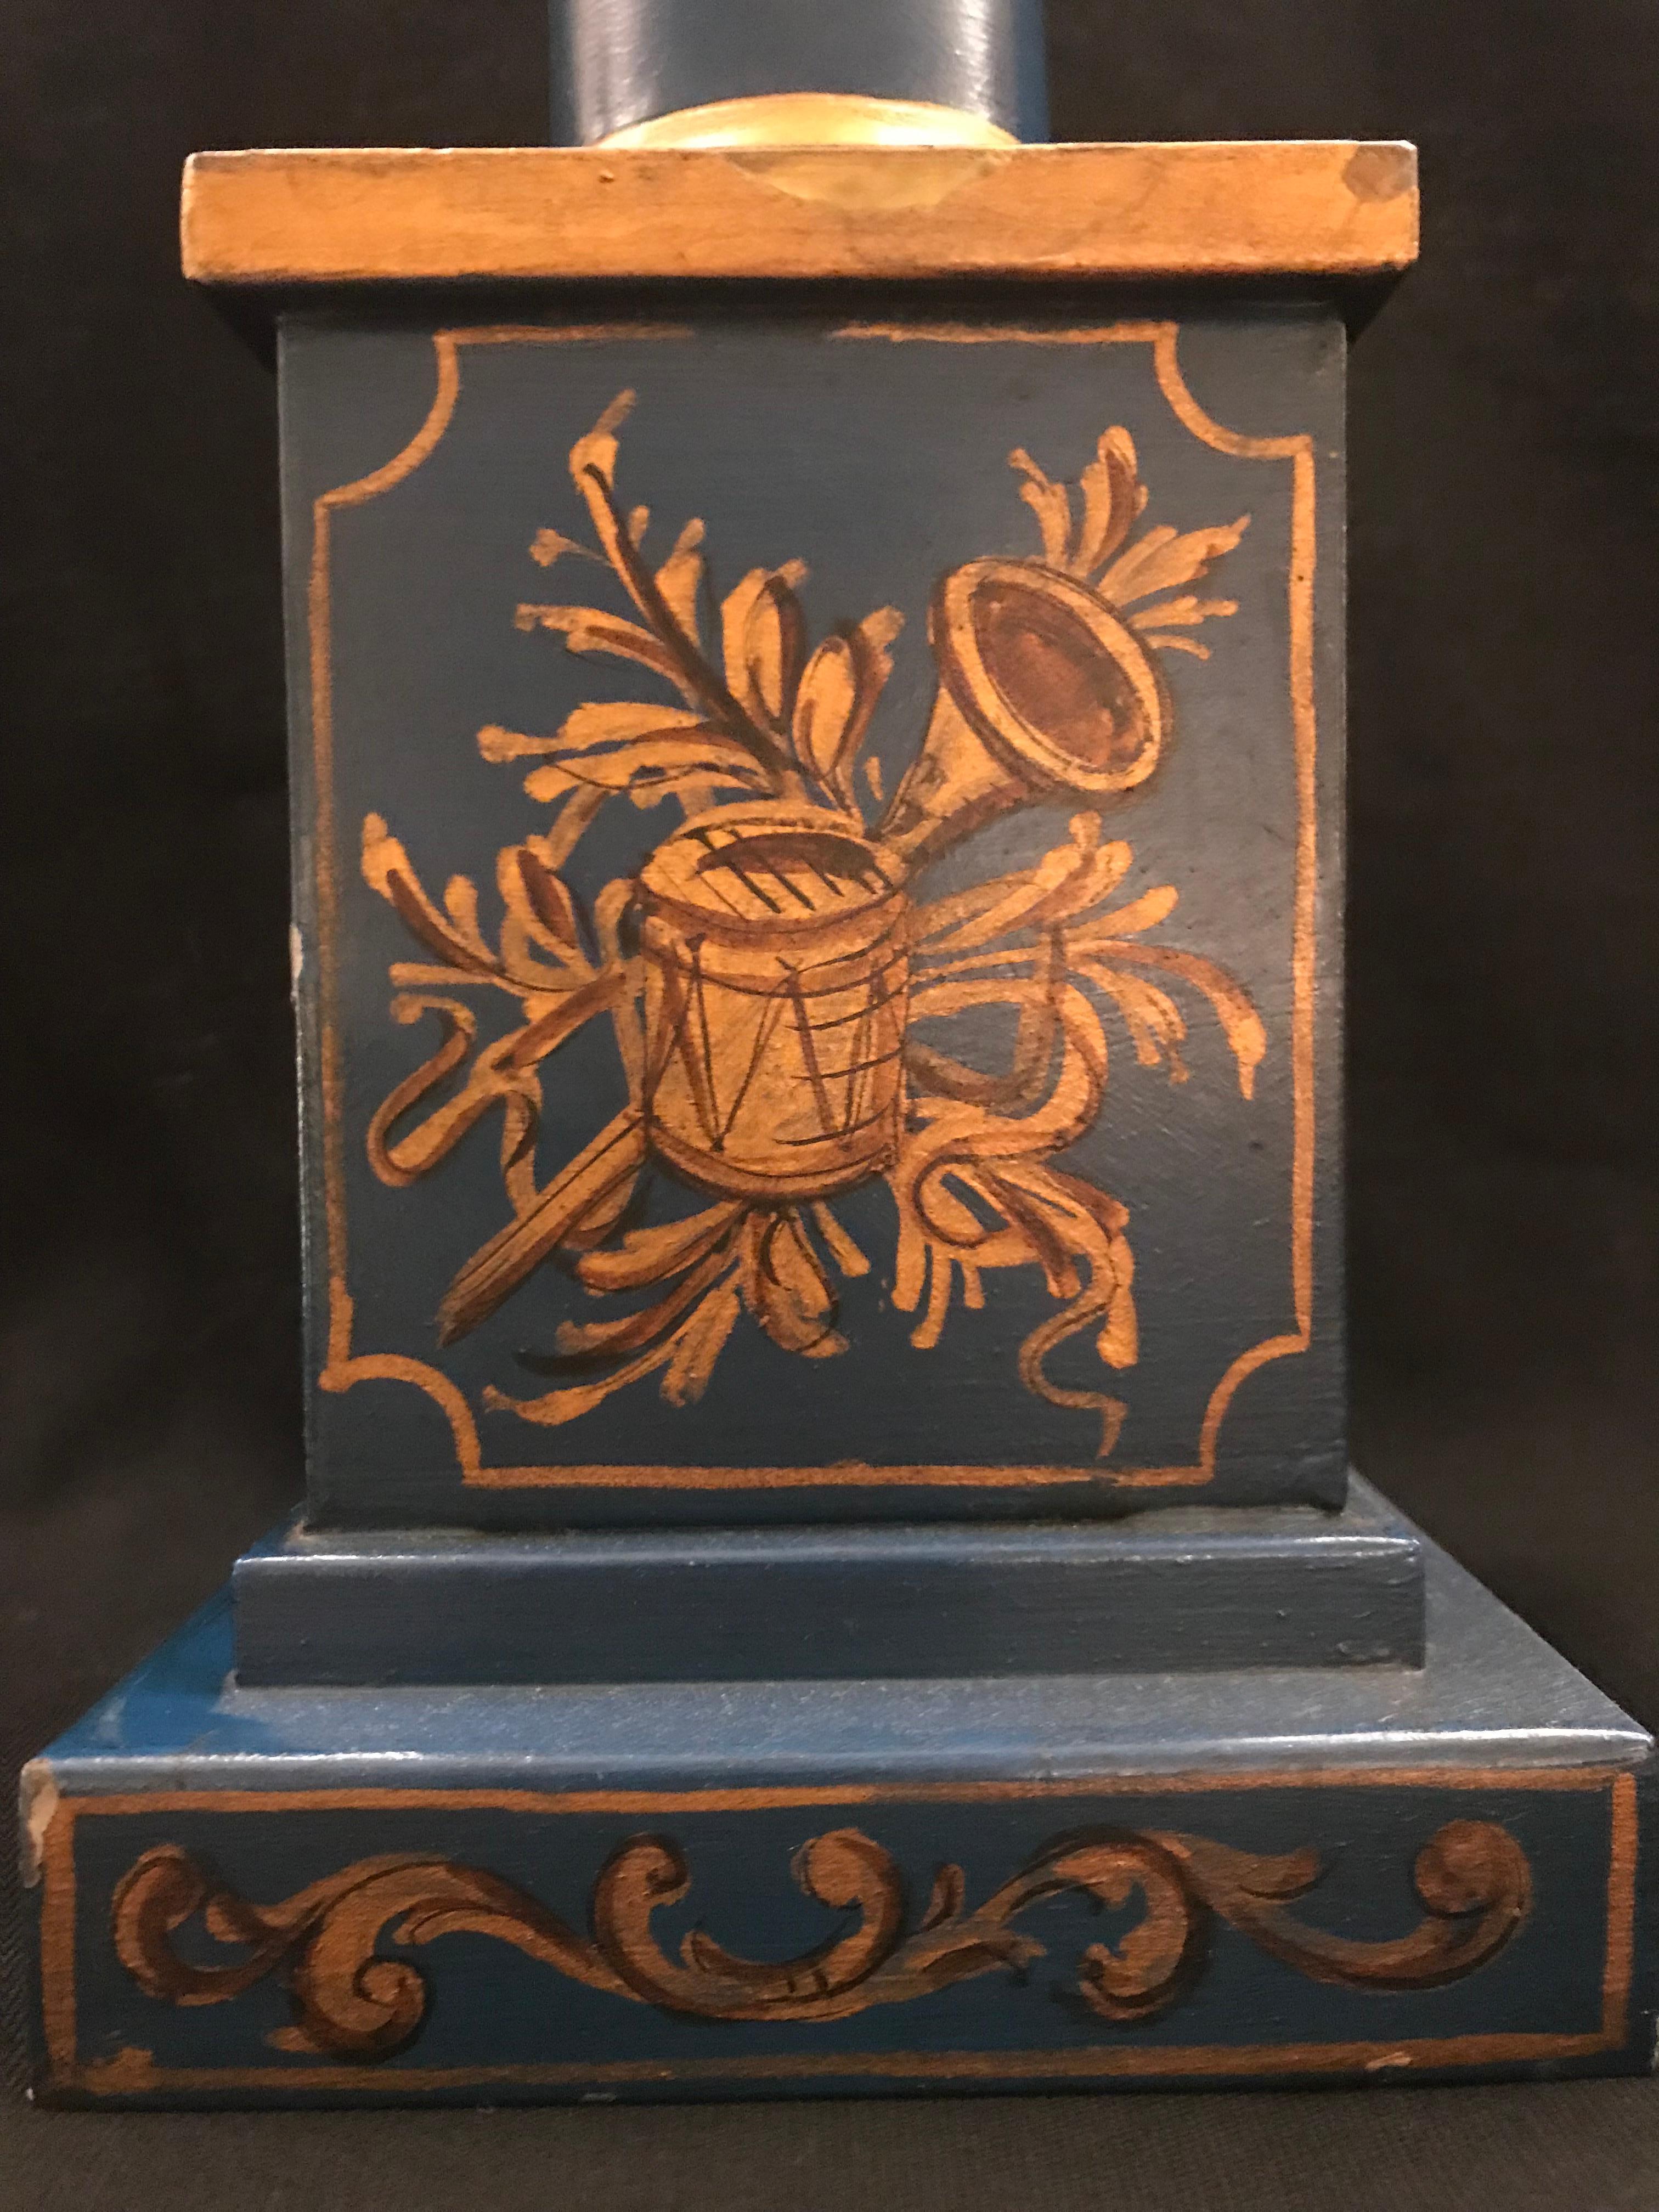 Exquisite English Regency style tole lamp By Gherardo Degli Albizzi featuring a columnar form with a round base, but is available even with a square base, with hand-painted decoration all-over the background. Hand painted wreaths adorn all around